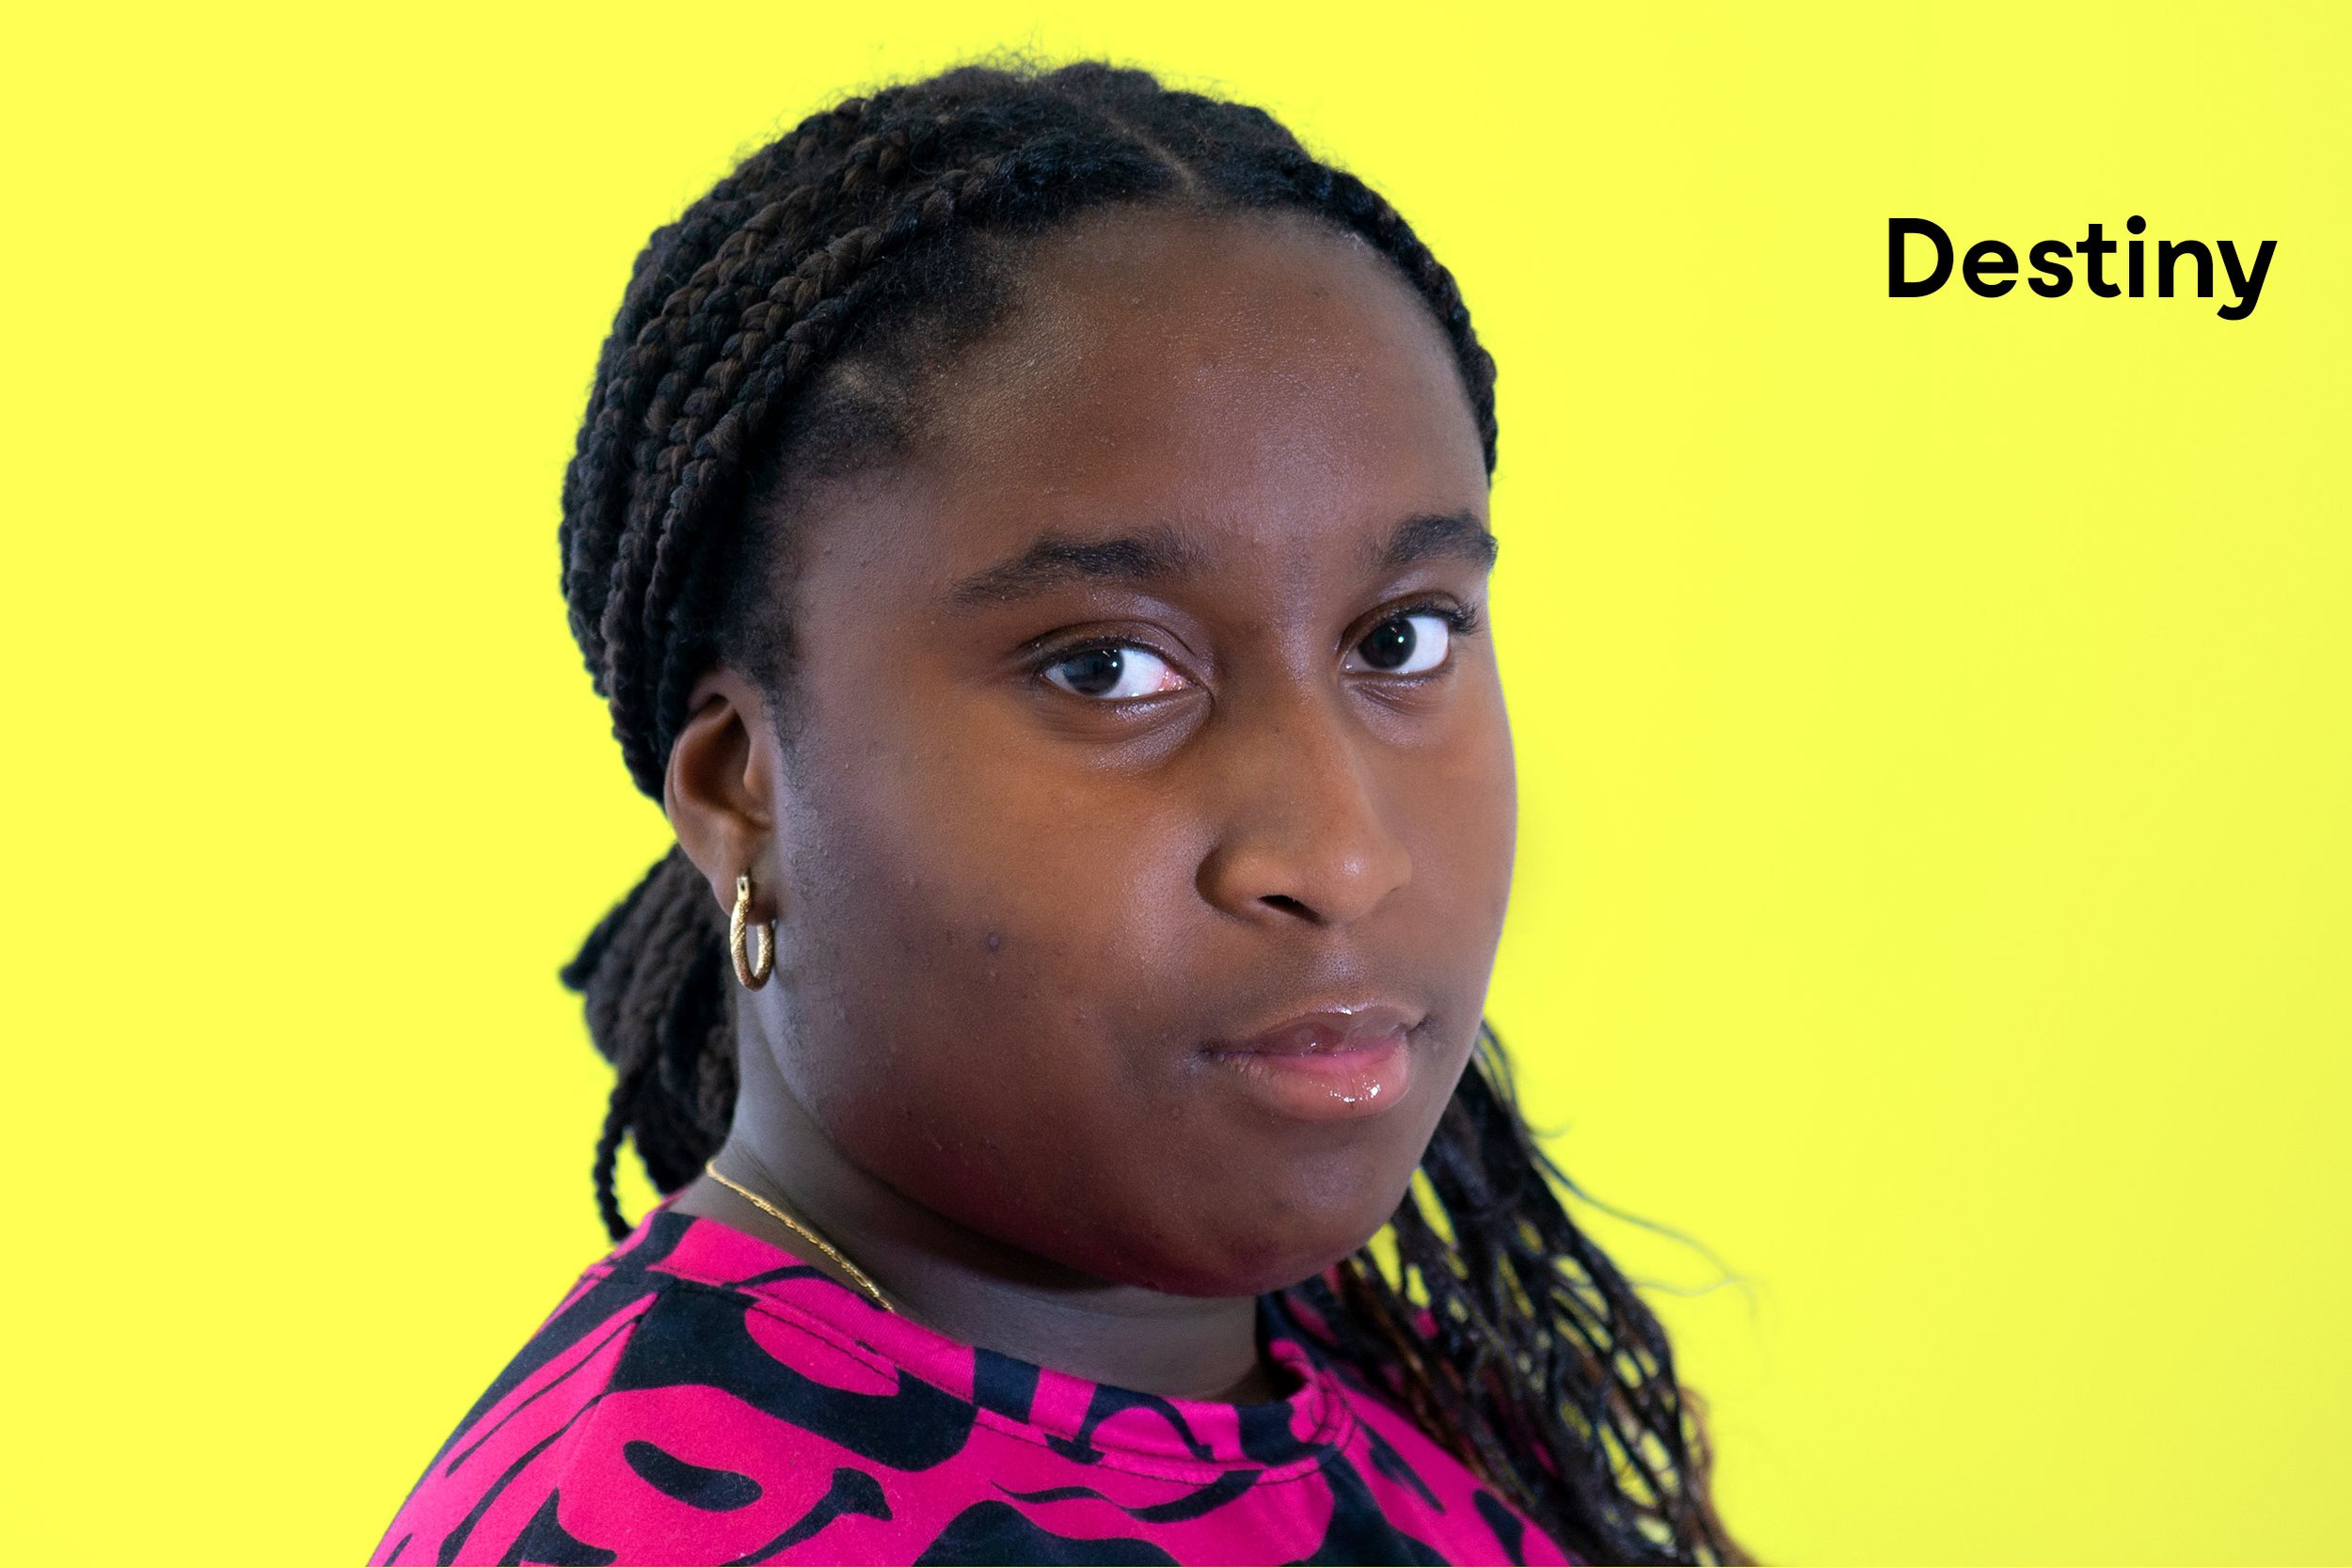   Destiny  Gbaniyi (b. 2009) is a high school student at École La Voie in the borough of Côte-des-Neiges. She aspires to become a lawyer by day and a sculpture artist by night. For the time being, Destiny is focused on continuing to win her dancing a